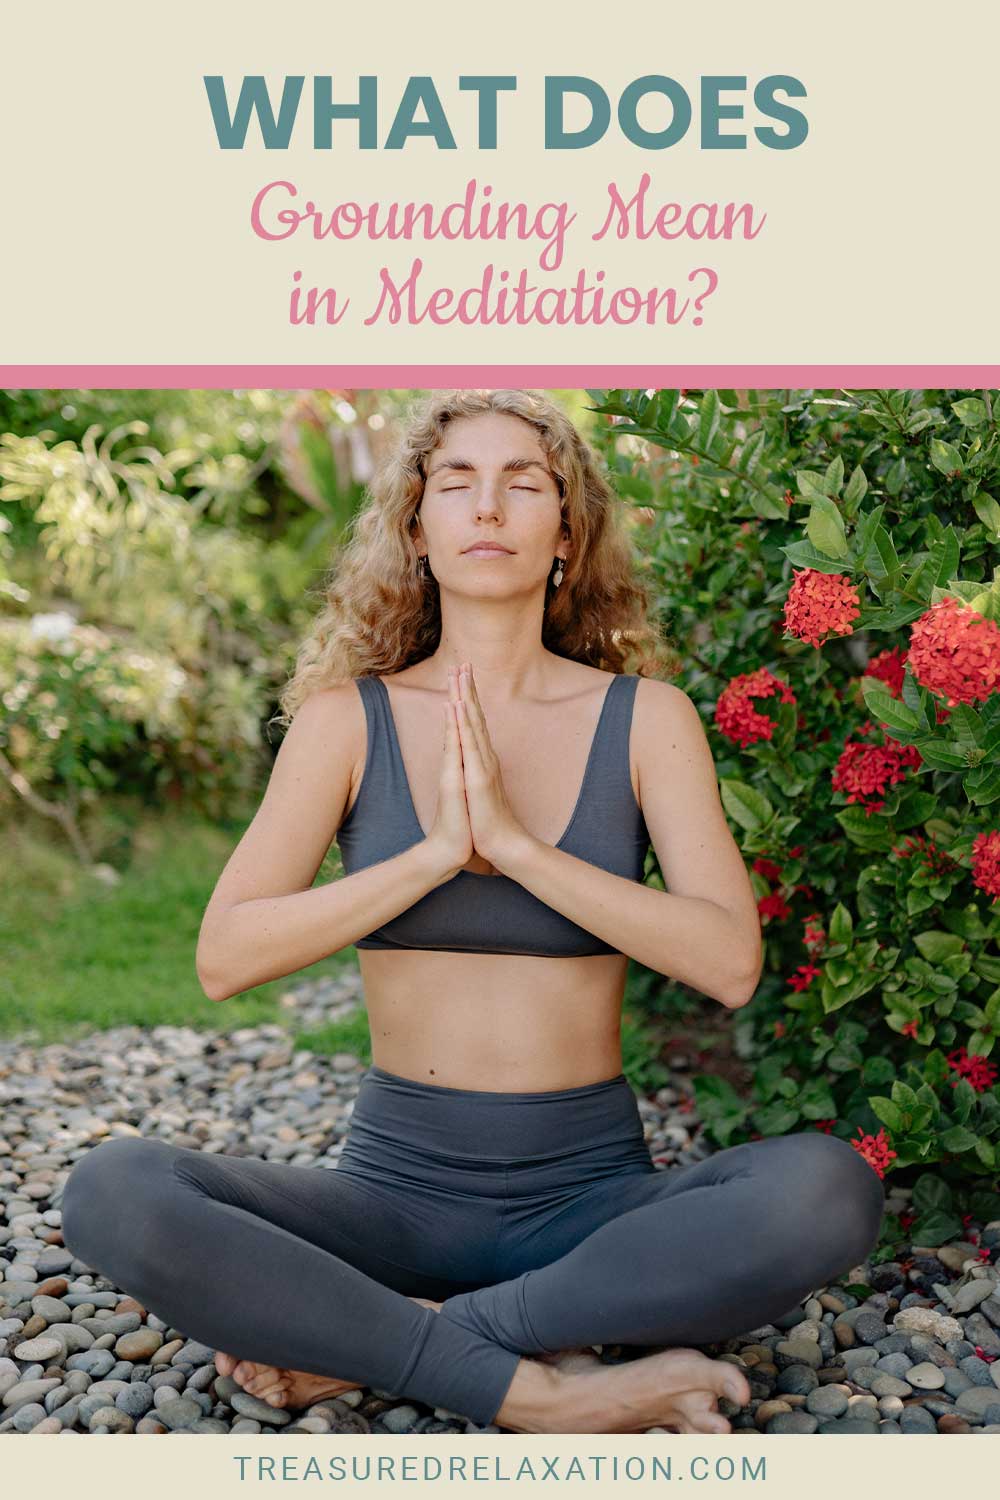 Woman wearing grey tights meditating sitting on rocks near a Hydrangea plant - What Does Grounding Mean in Meditation?